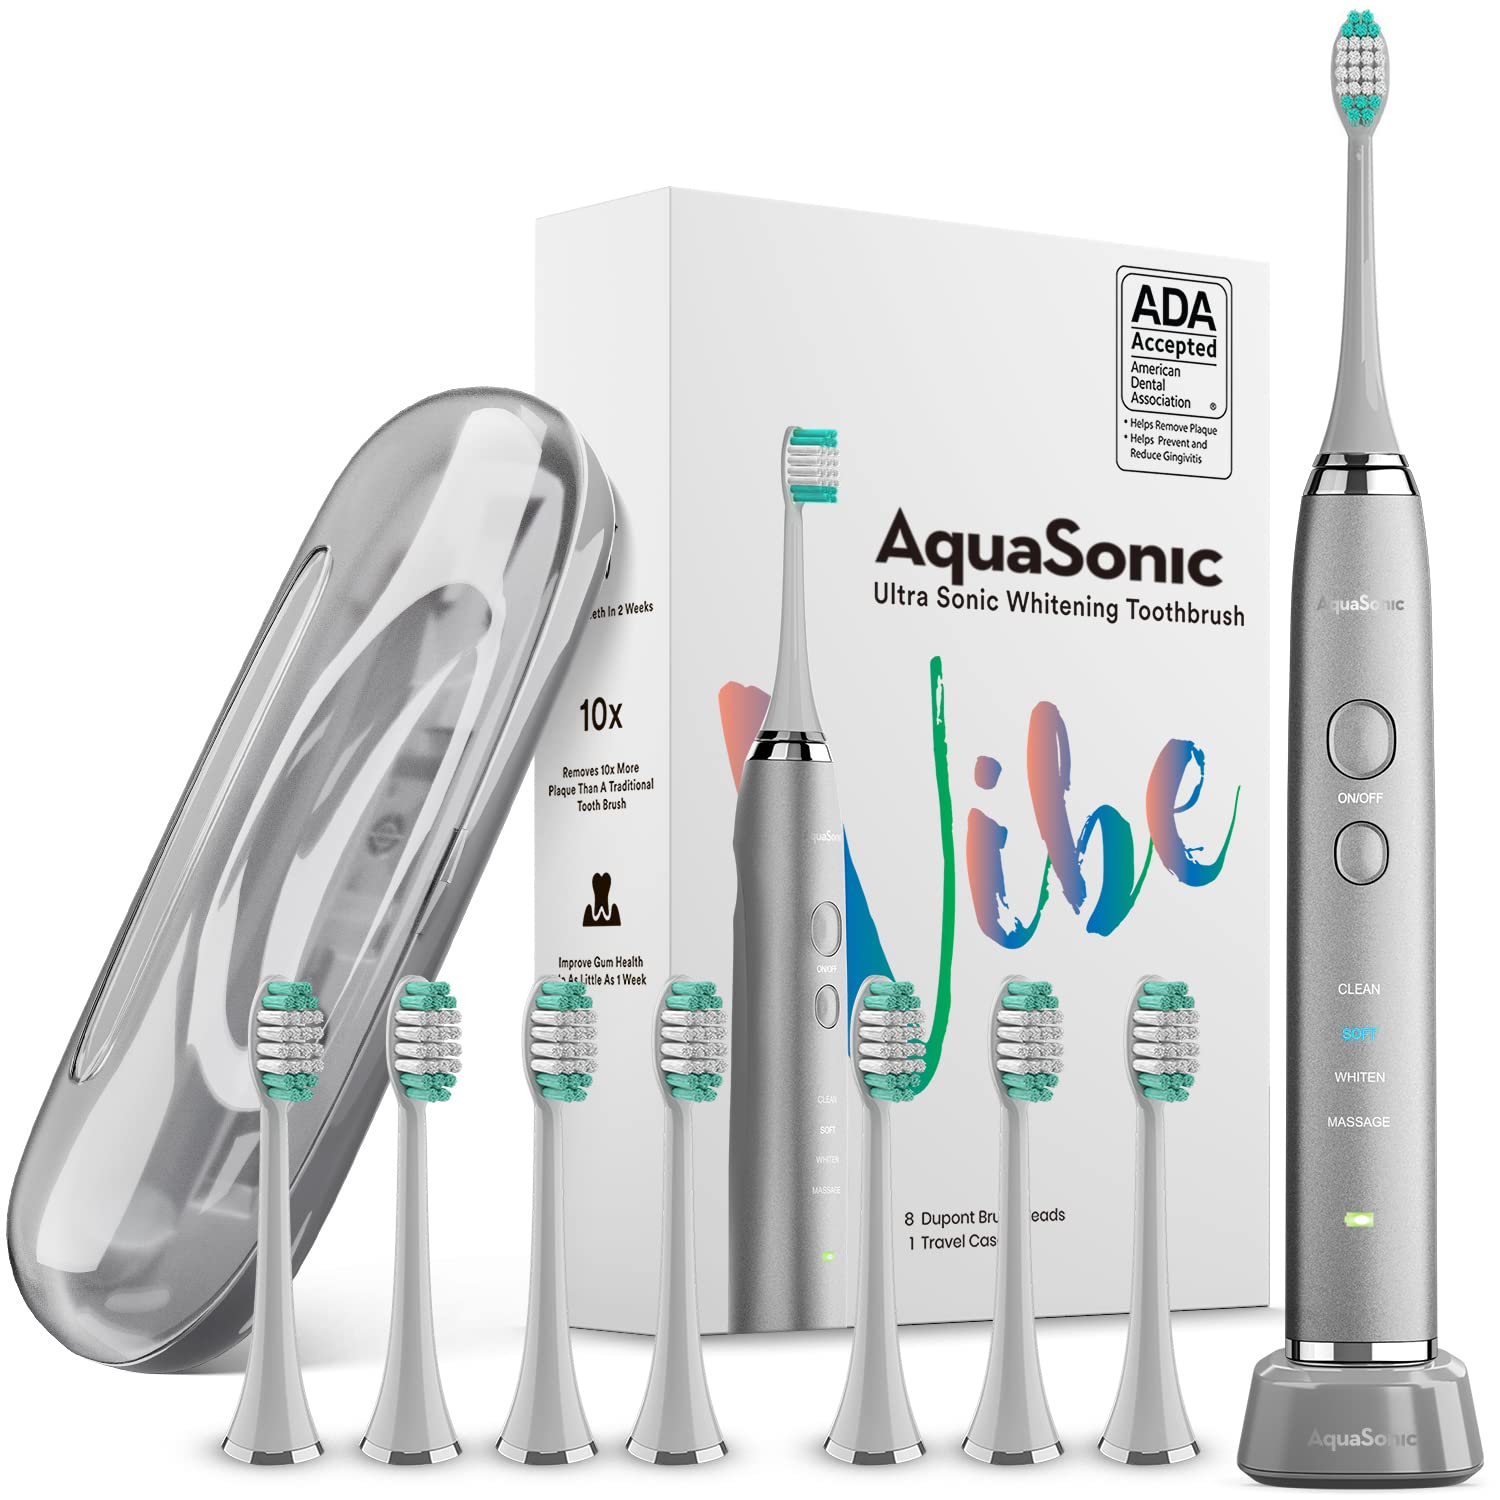 Aquasonic Vibe Series Ultra Whitening Toothbrush 2-Pack of Refresh & Protect Day Toothpaste